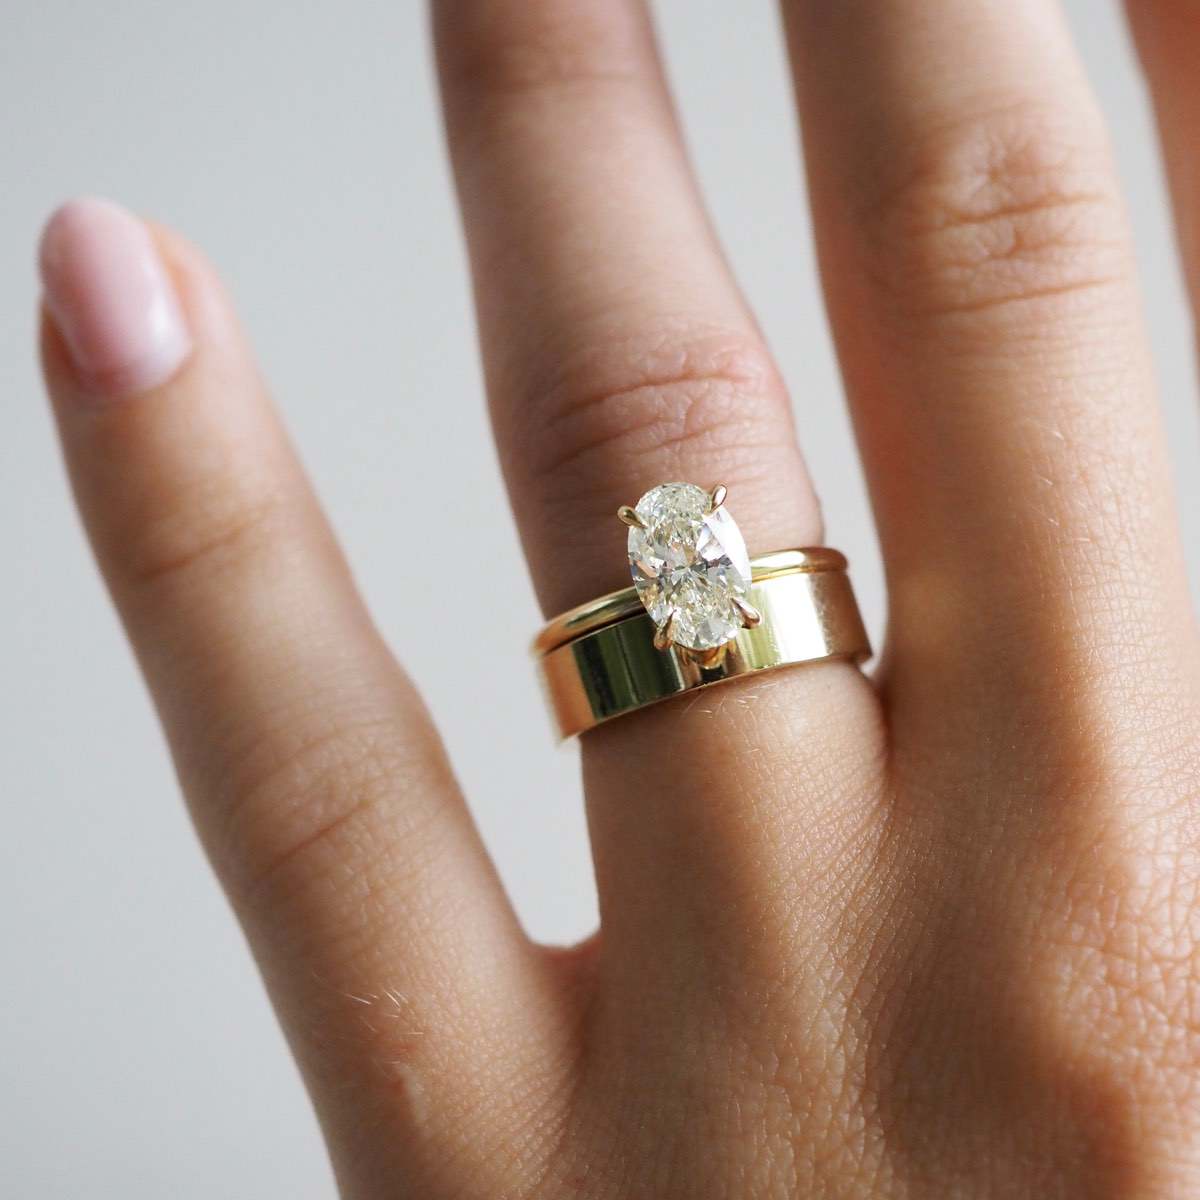 A heavy cigar band designed for comfort and simplicity, featuring a beautifully polished surface & straight square edges. Our Cigar band is 5mm wide, 1.75mm thick and a polished finish. Featuring our Clara lab grown diamond engagement ring. 